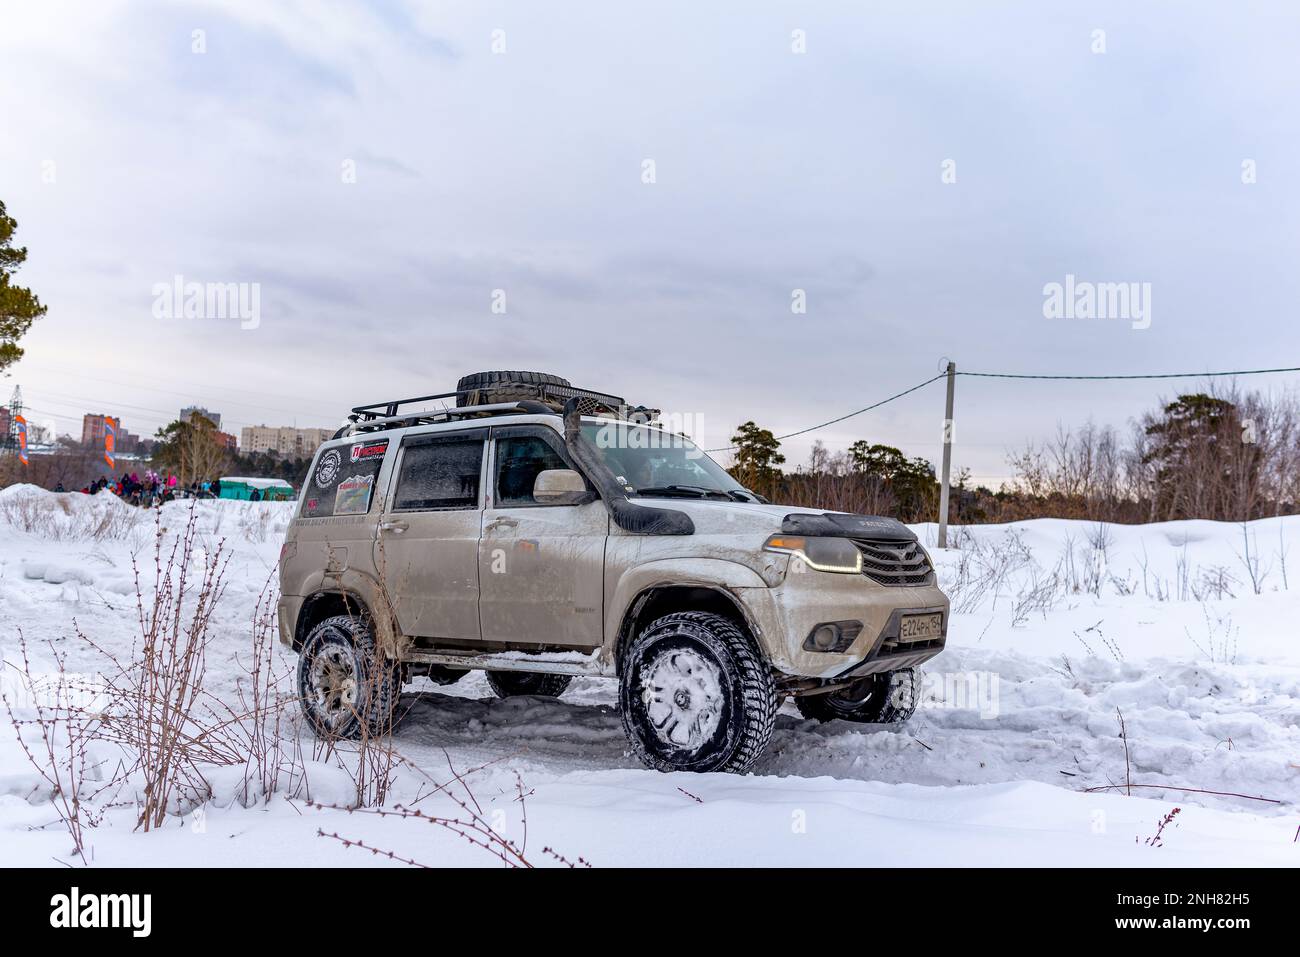 Russian white 4x4 SUV 'UAZ Patriot' rides on a snowy road in winter. Stock Photo